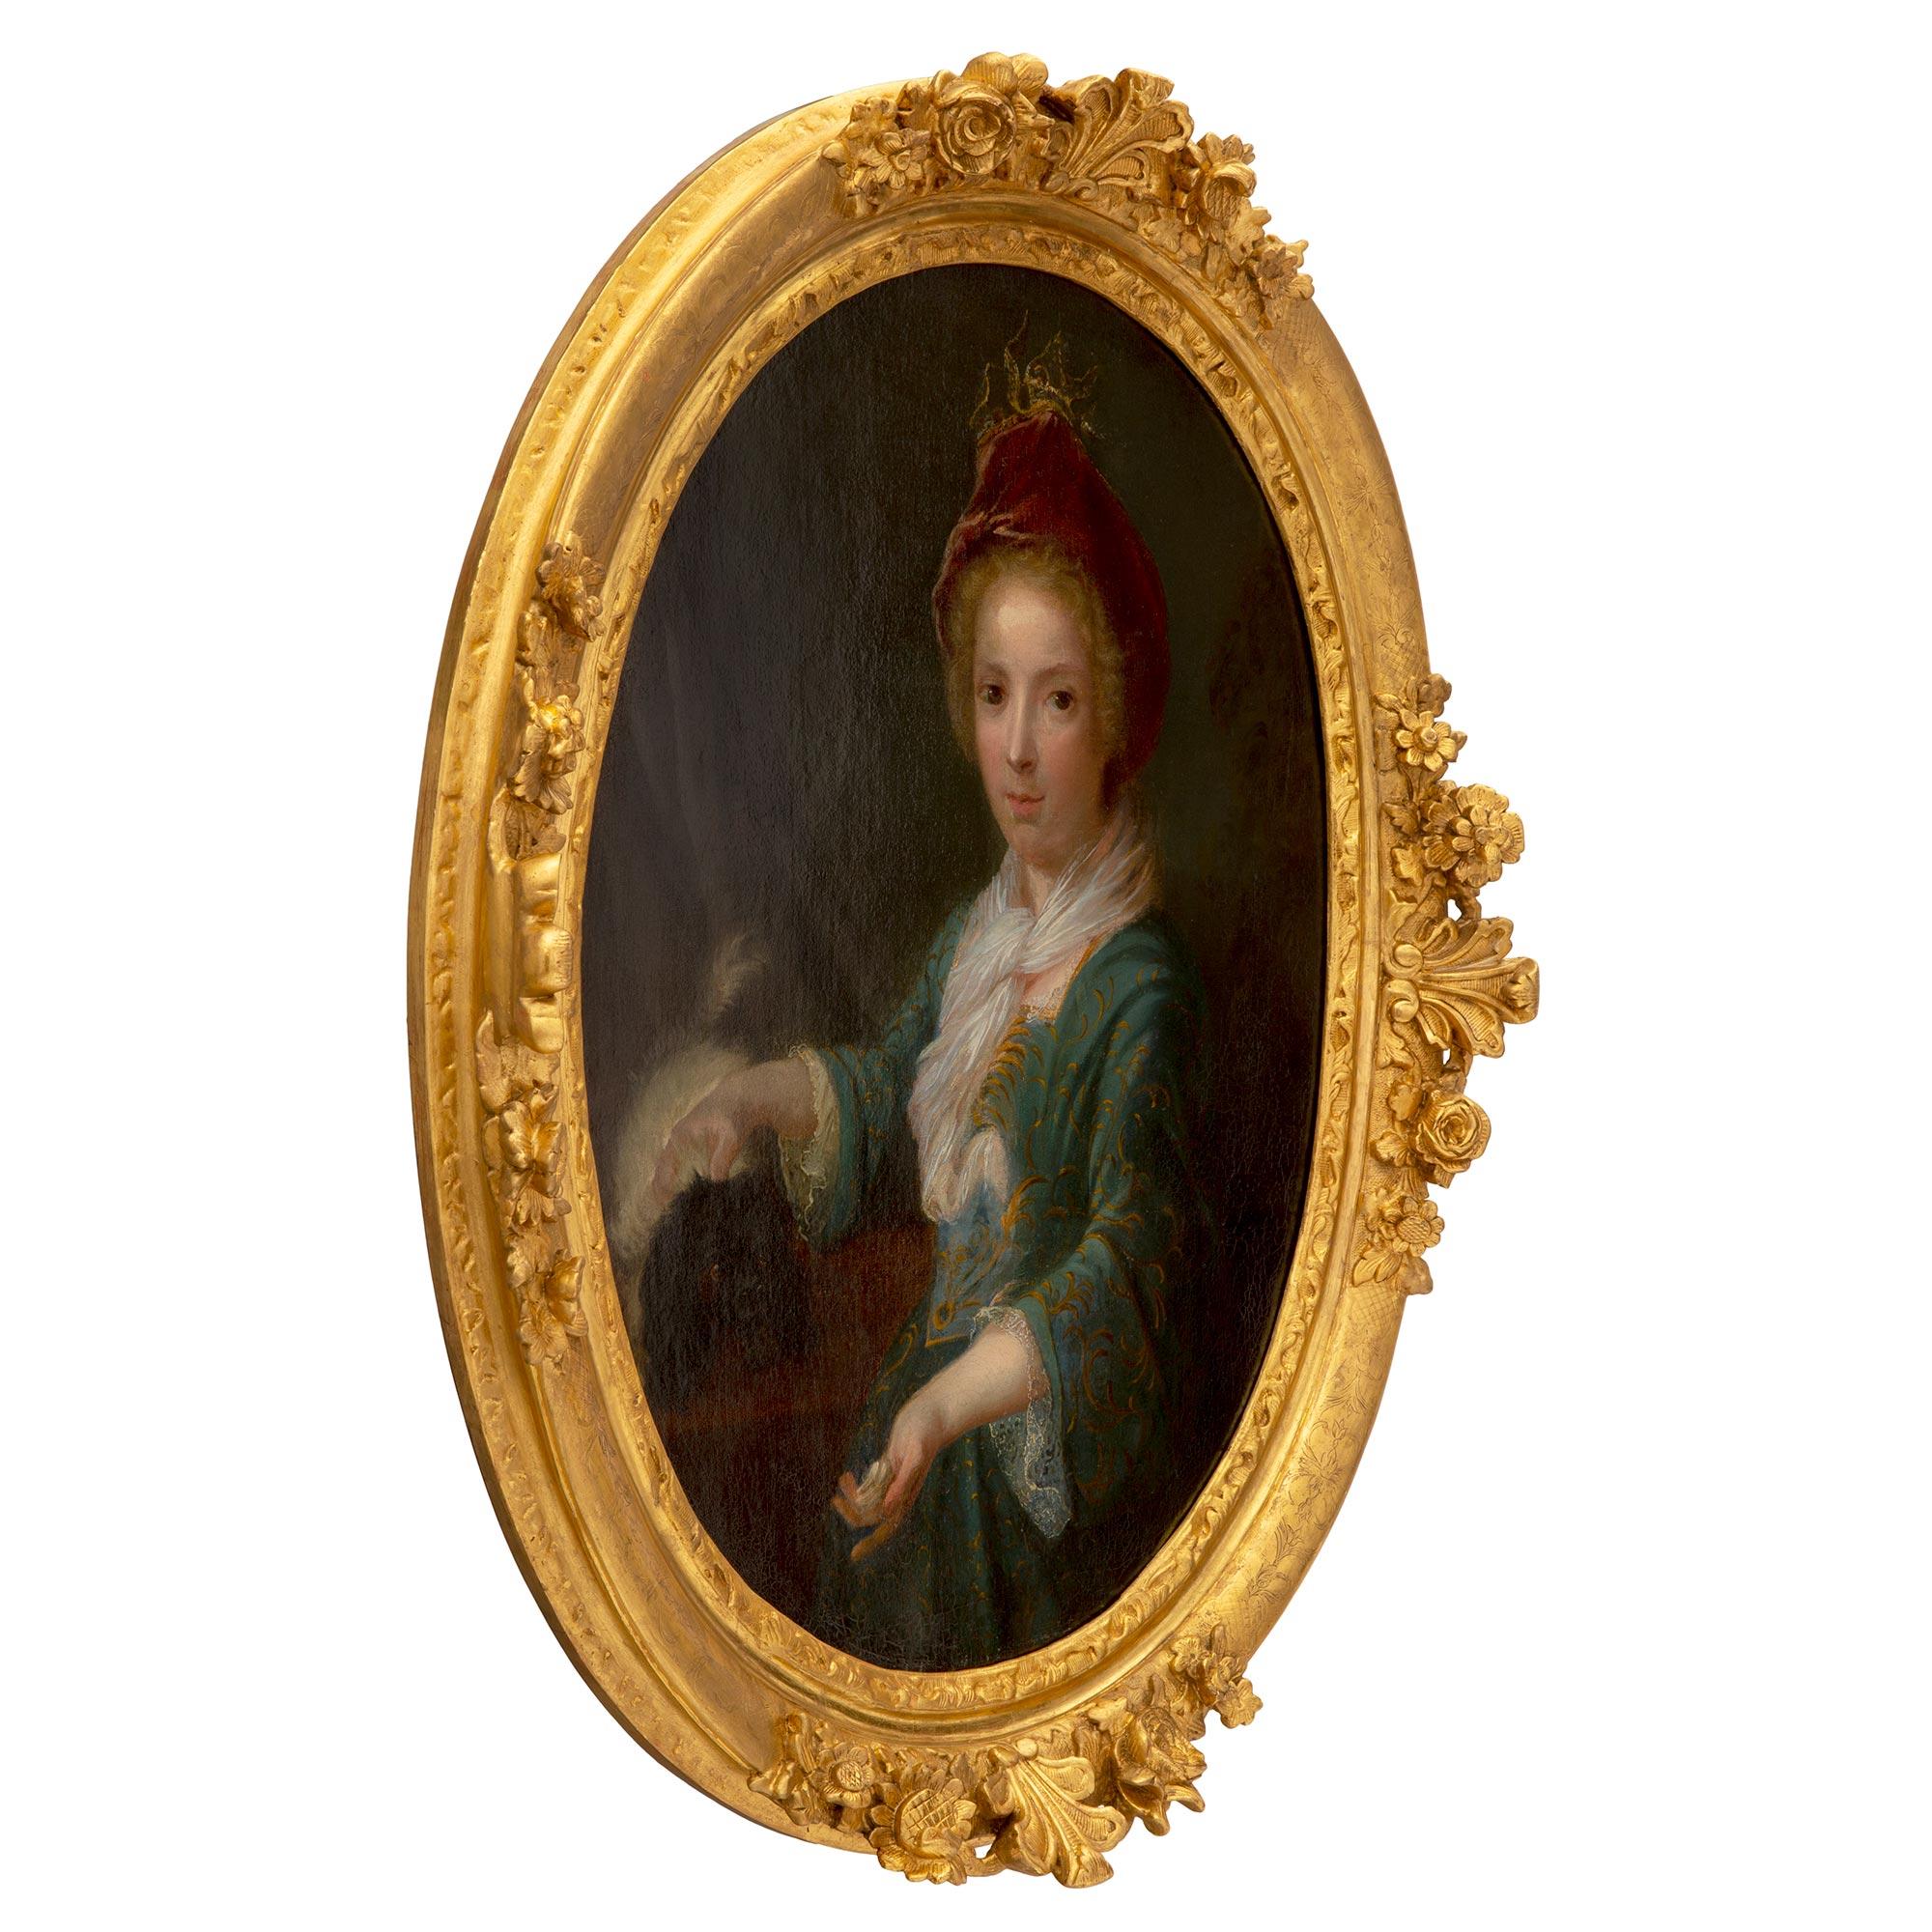 A most elegant French early 19th century giltwood and oil on canvas portrait of a young girl. The oval painting retains its original frame decorated with four richly carved reserves with a central palmette flanked by beautiful blossoming flowers.